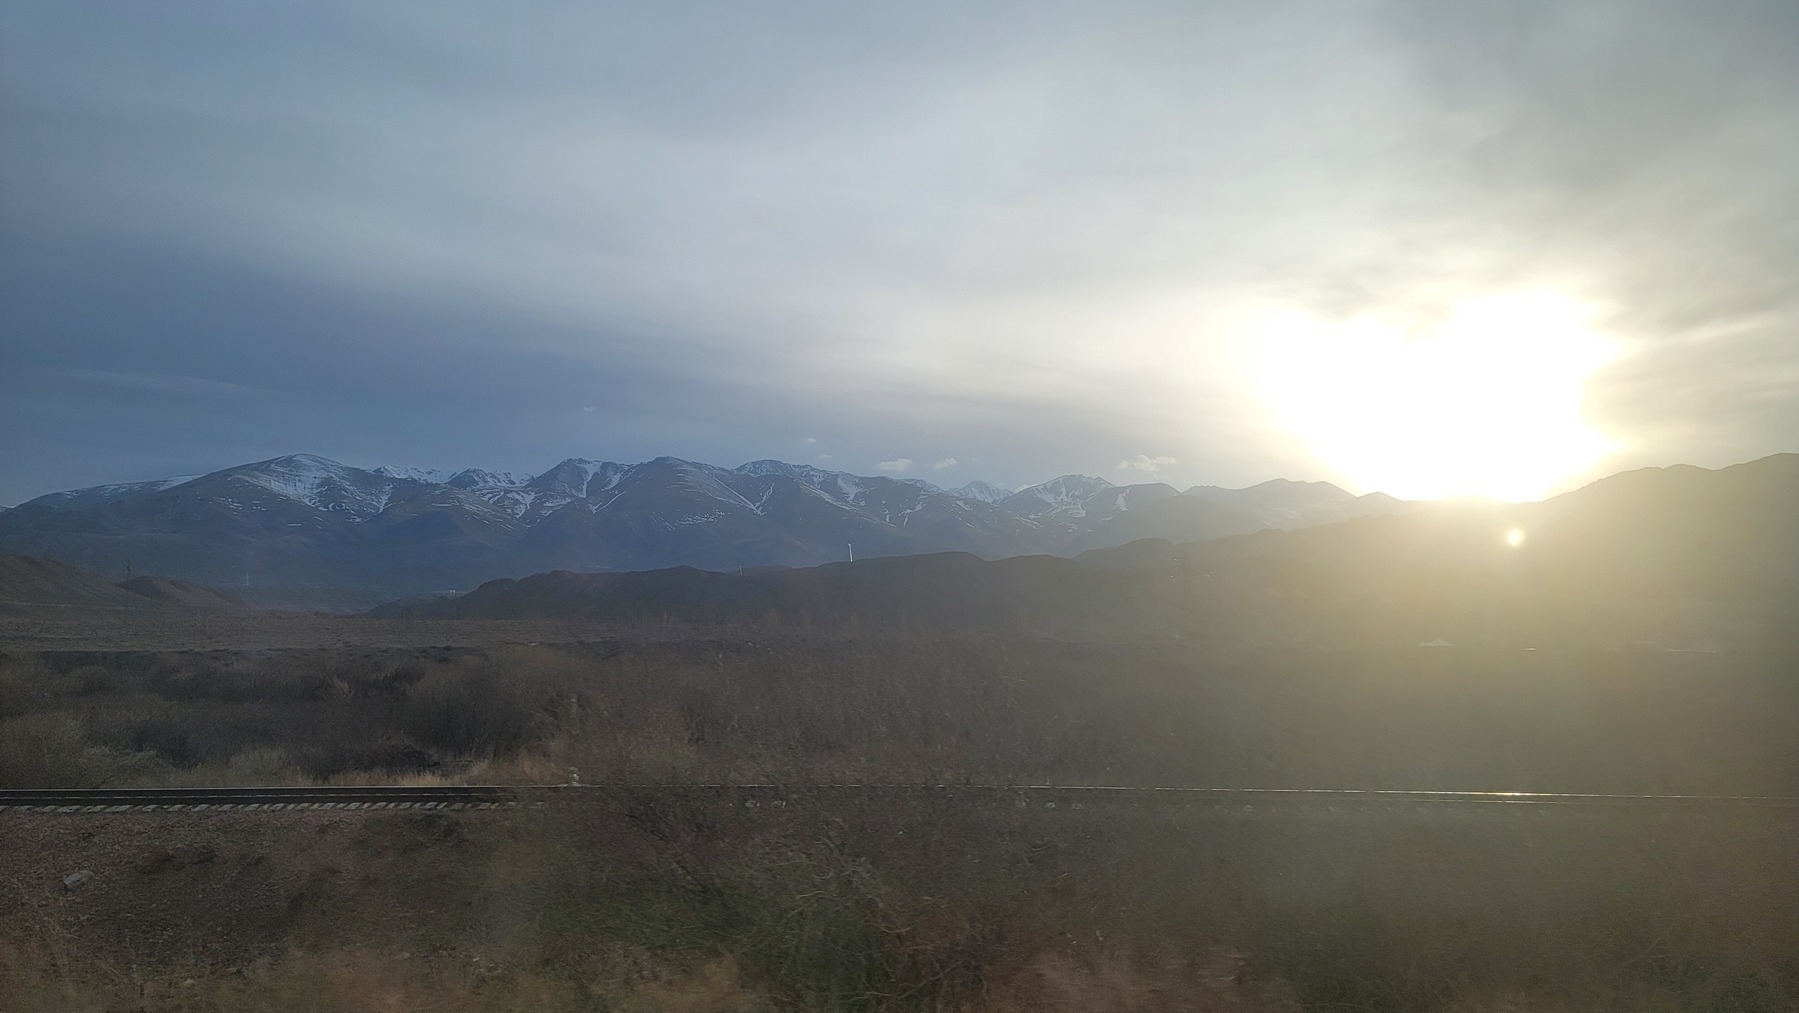 train track running from left to right, with mountains and a shining sun in the background (in the evening)